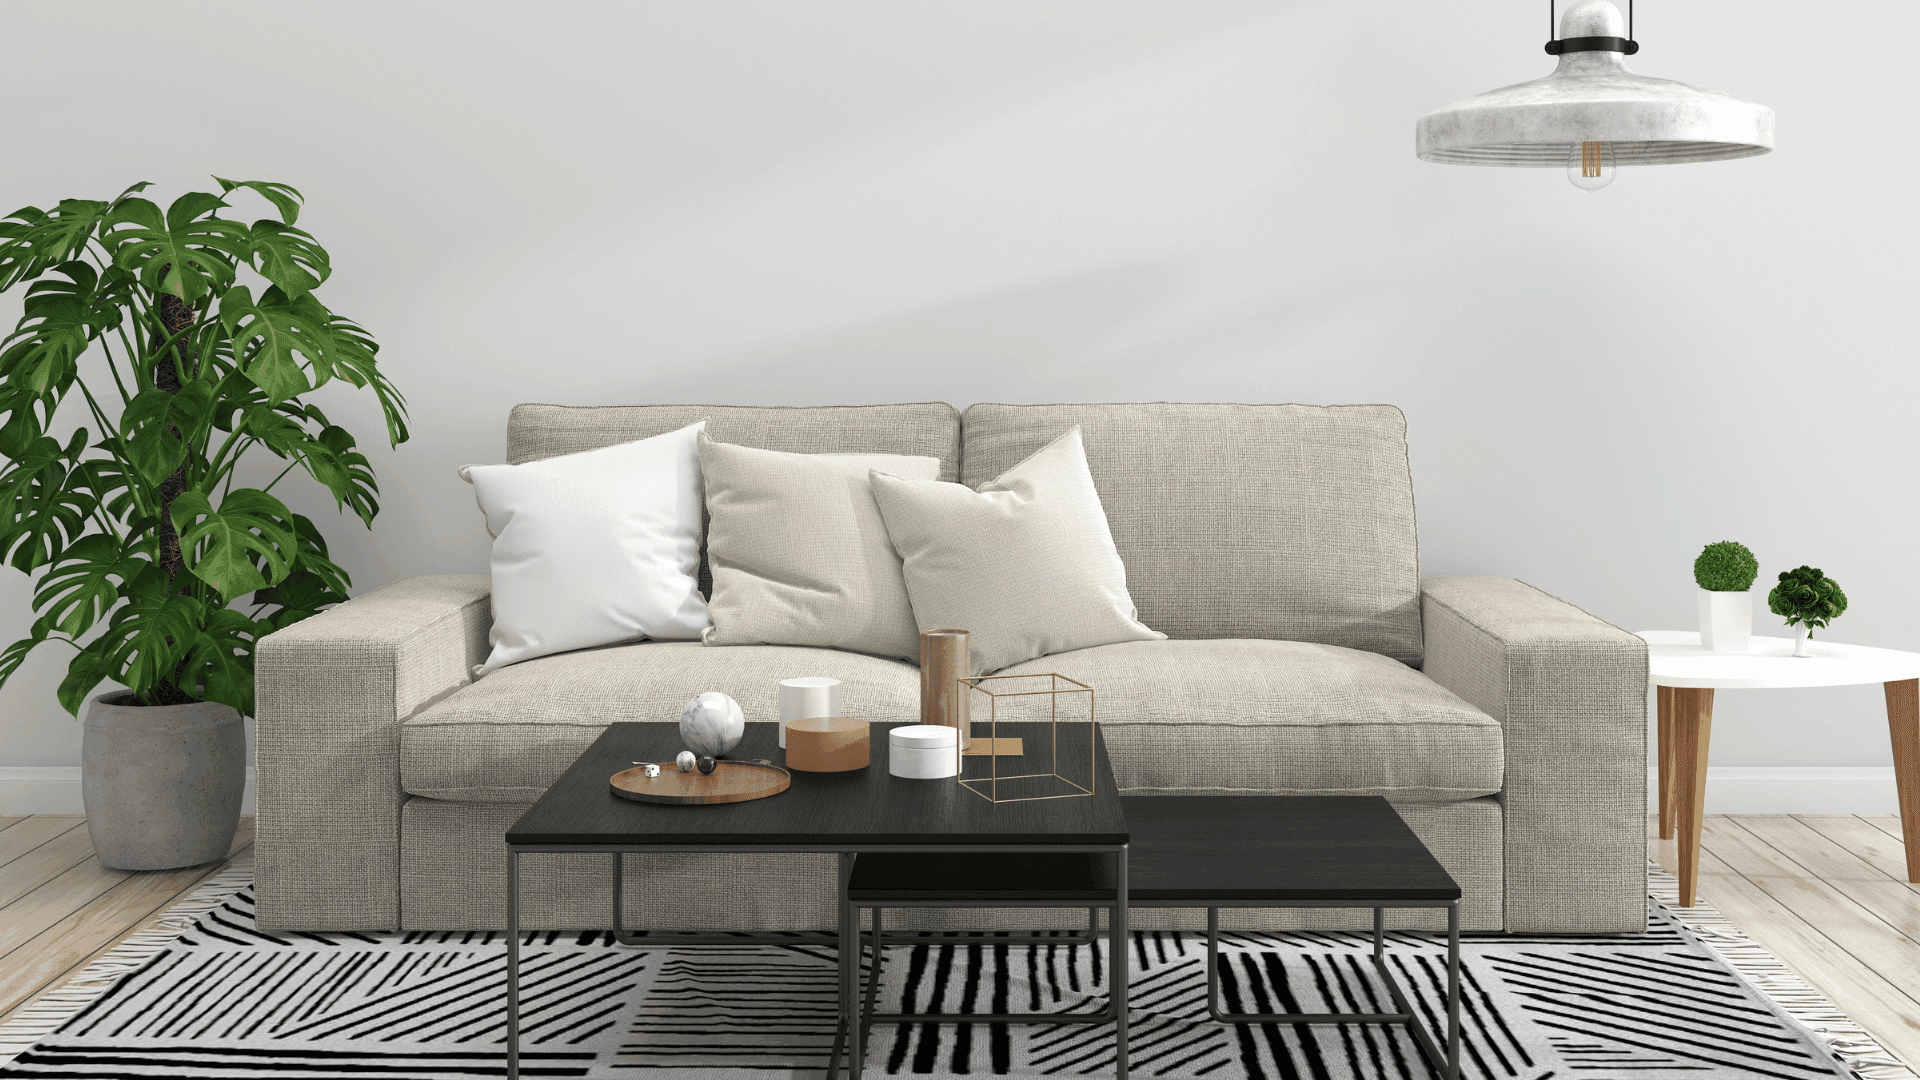 A living room with a beige couch with throw pillows, a black coffee table, a white side table, a plant, and a black and white striped rug. 